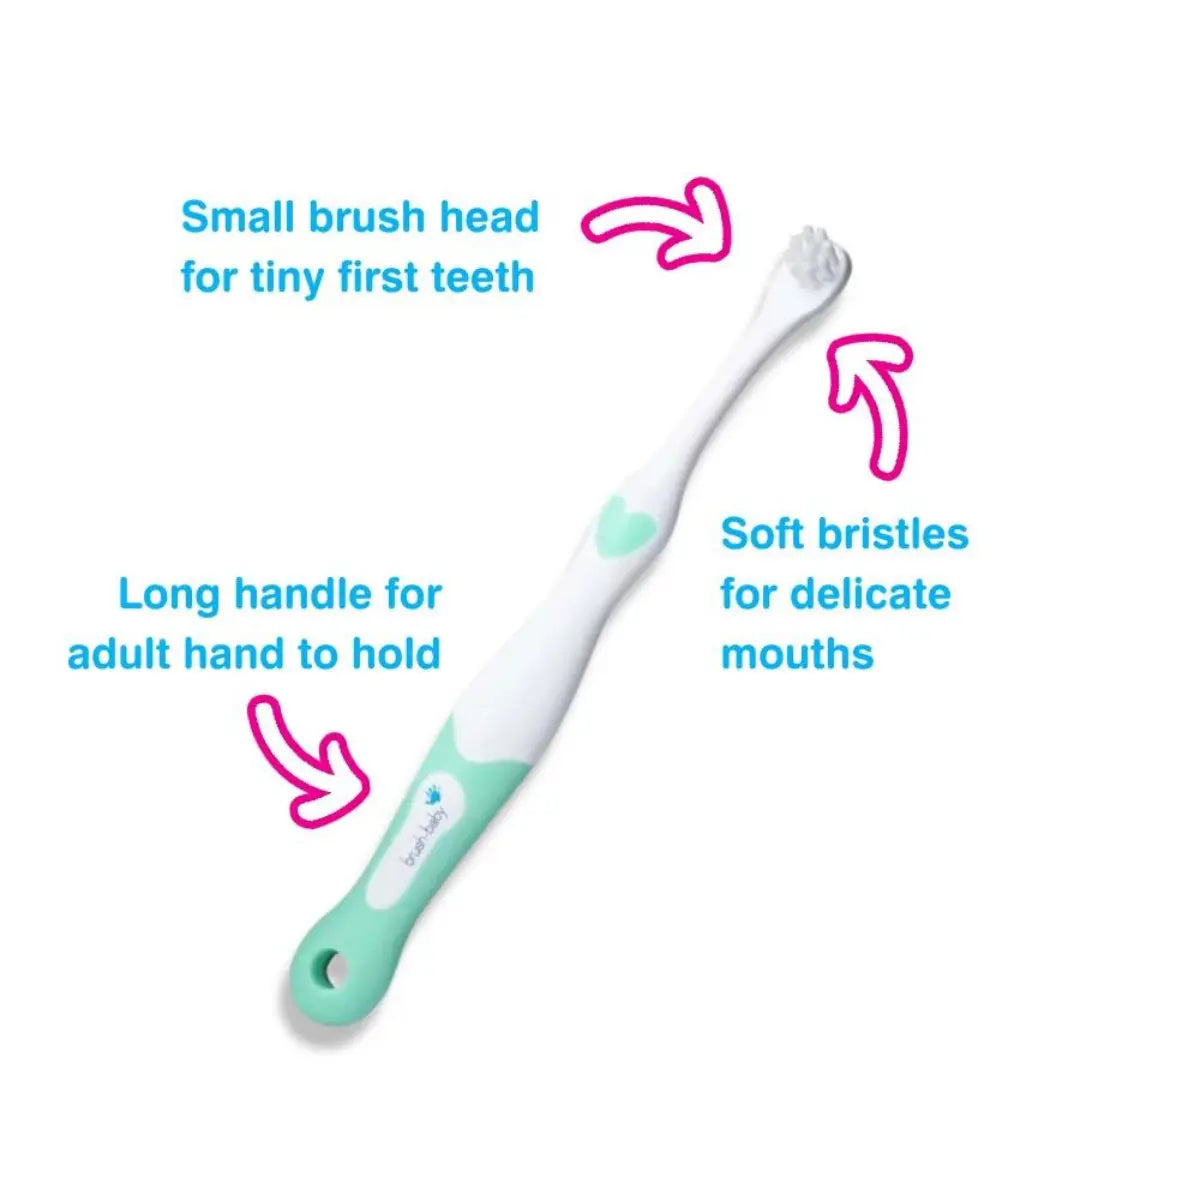 firstbrush first toothbrush for babies and toddlers USP